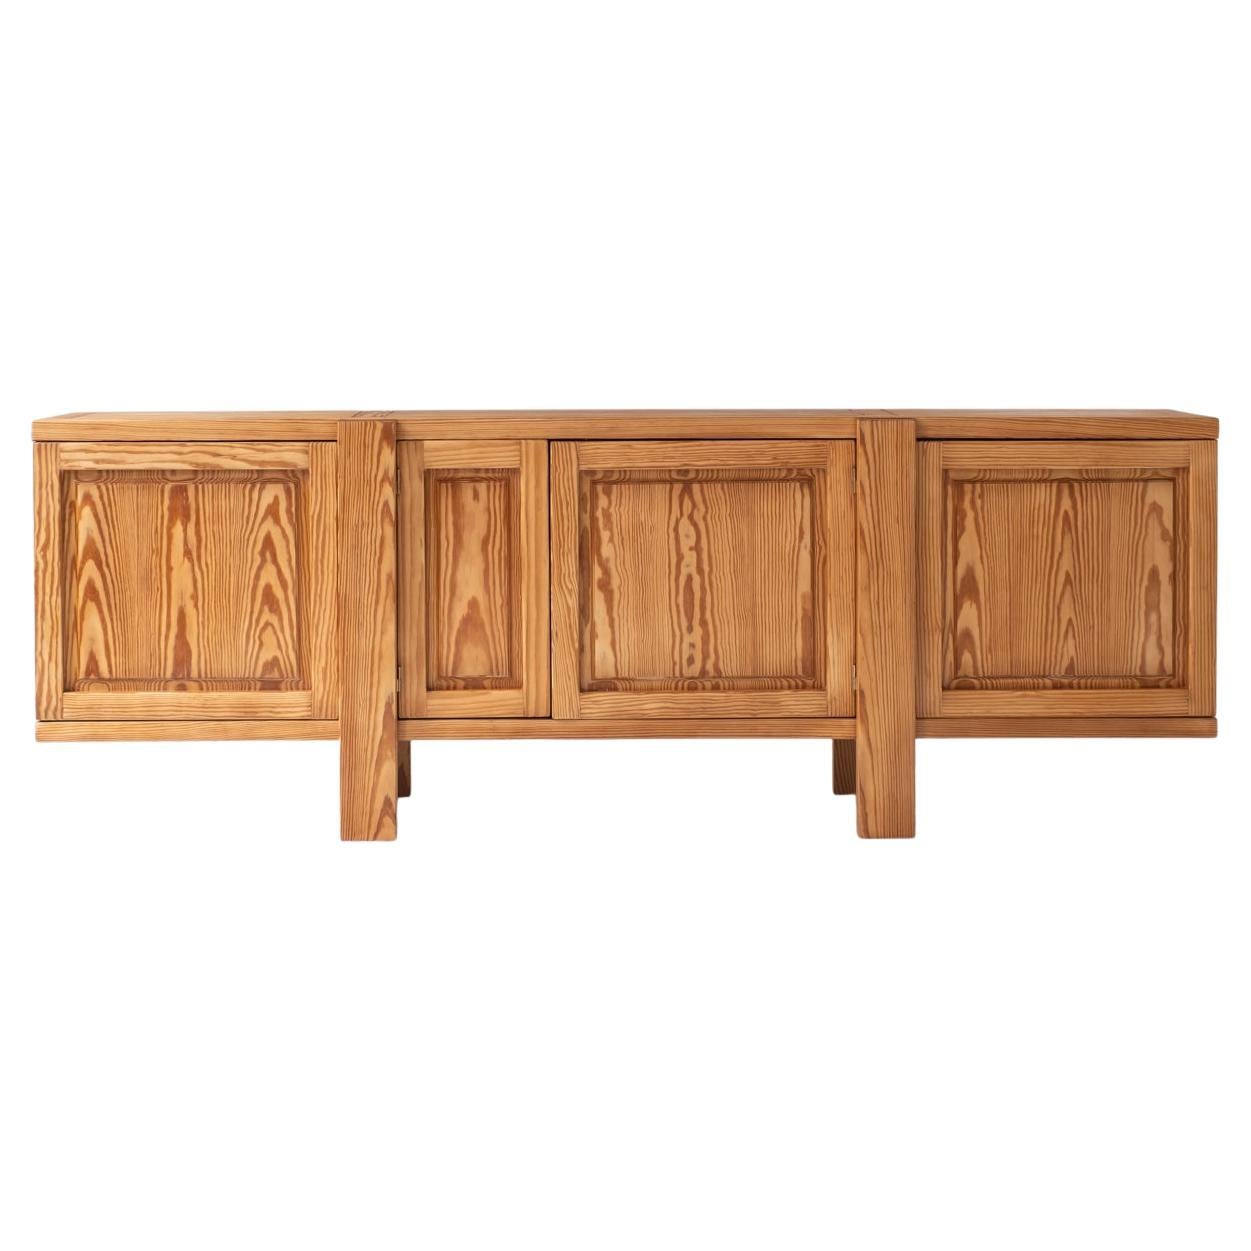 Sideboard in pine in the manner of the R16 by Pierre Chapo, France 1960s